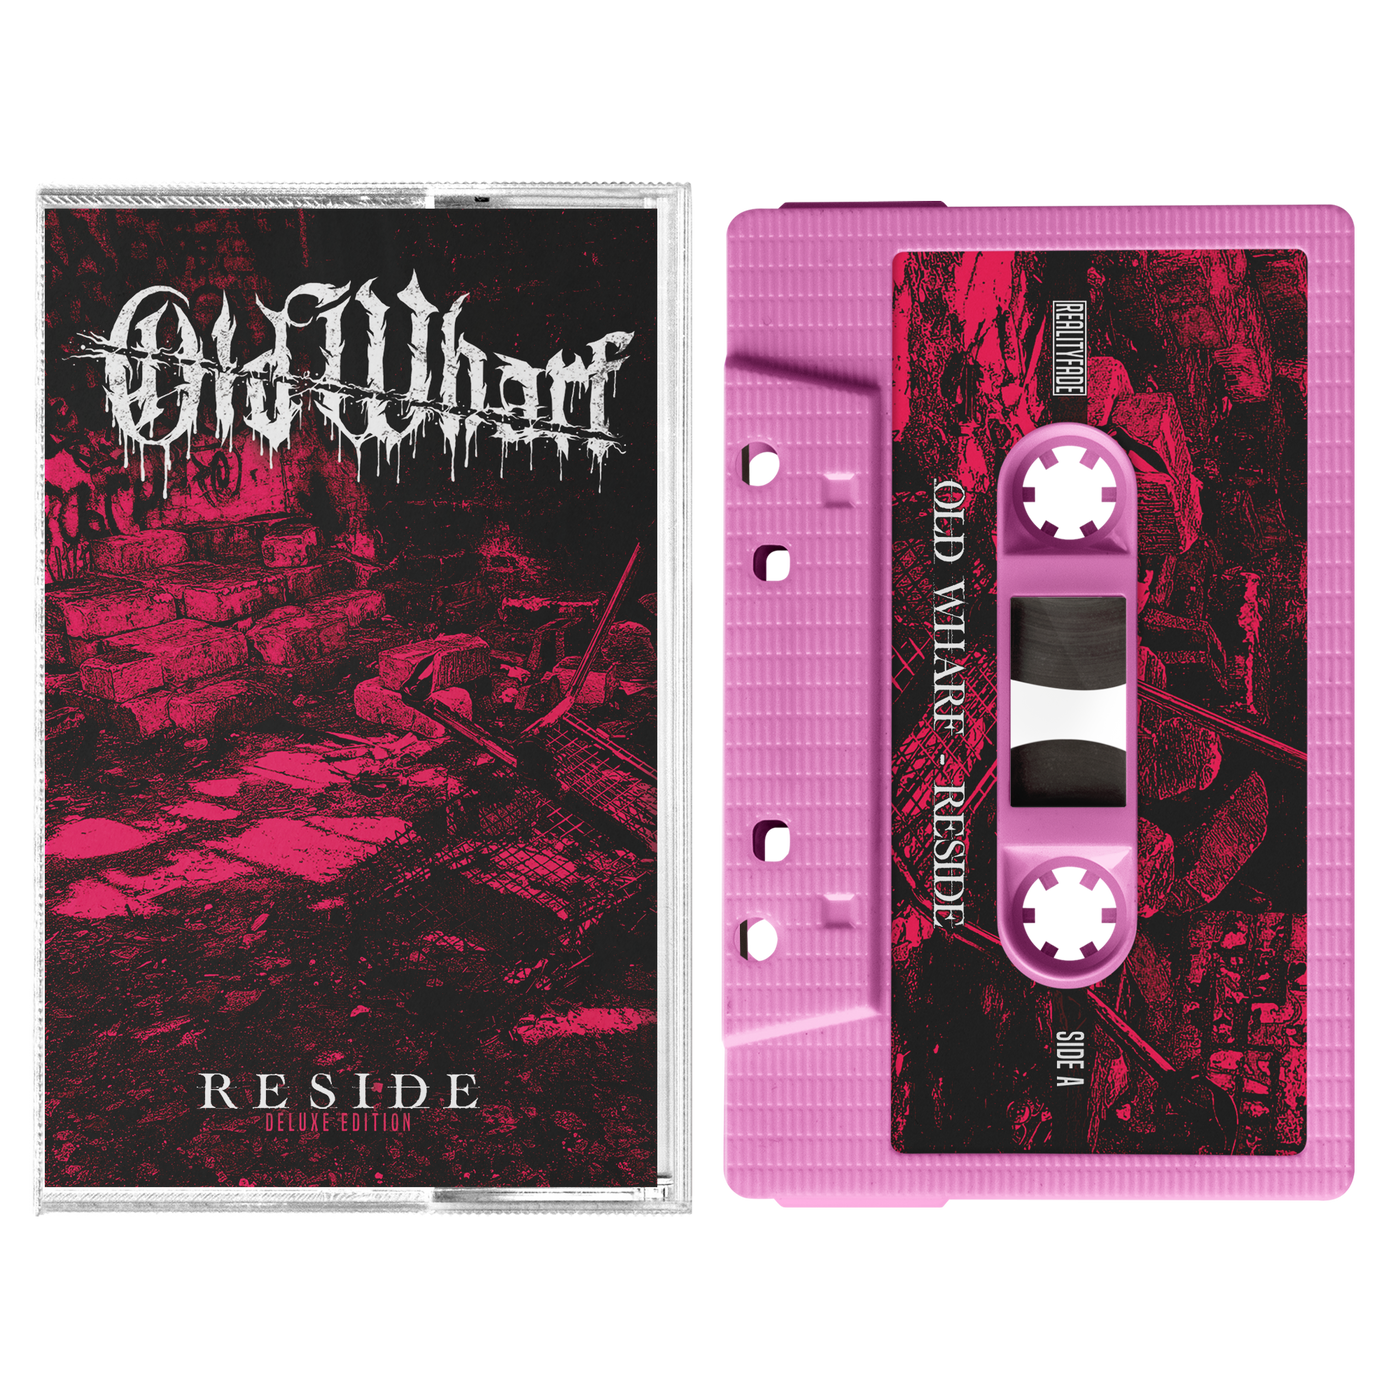 Old Wharf 'Reside (Deluxe Edition)' Cassette